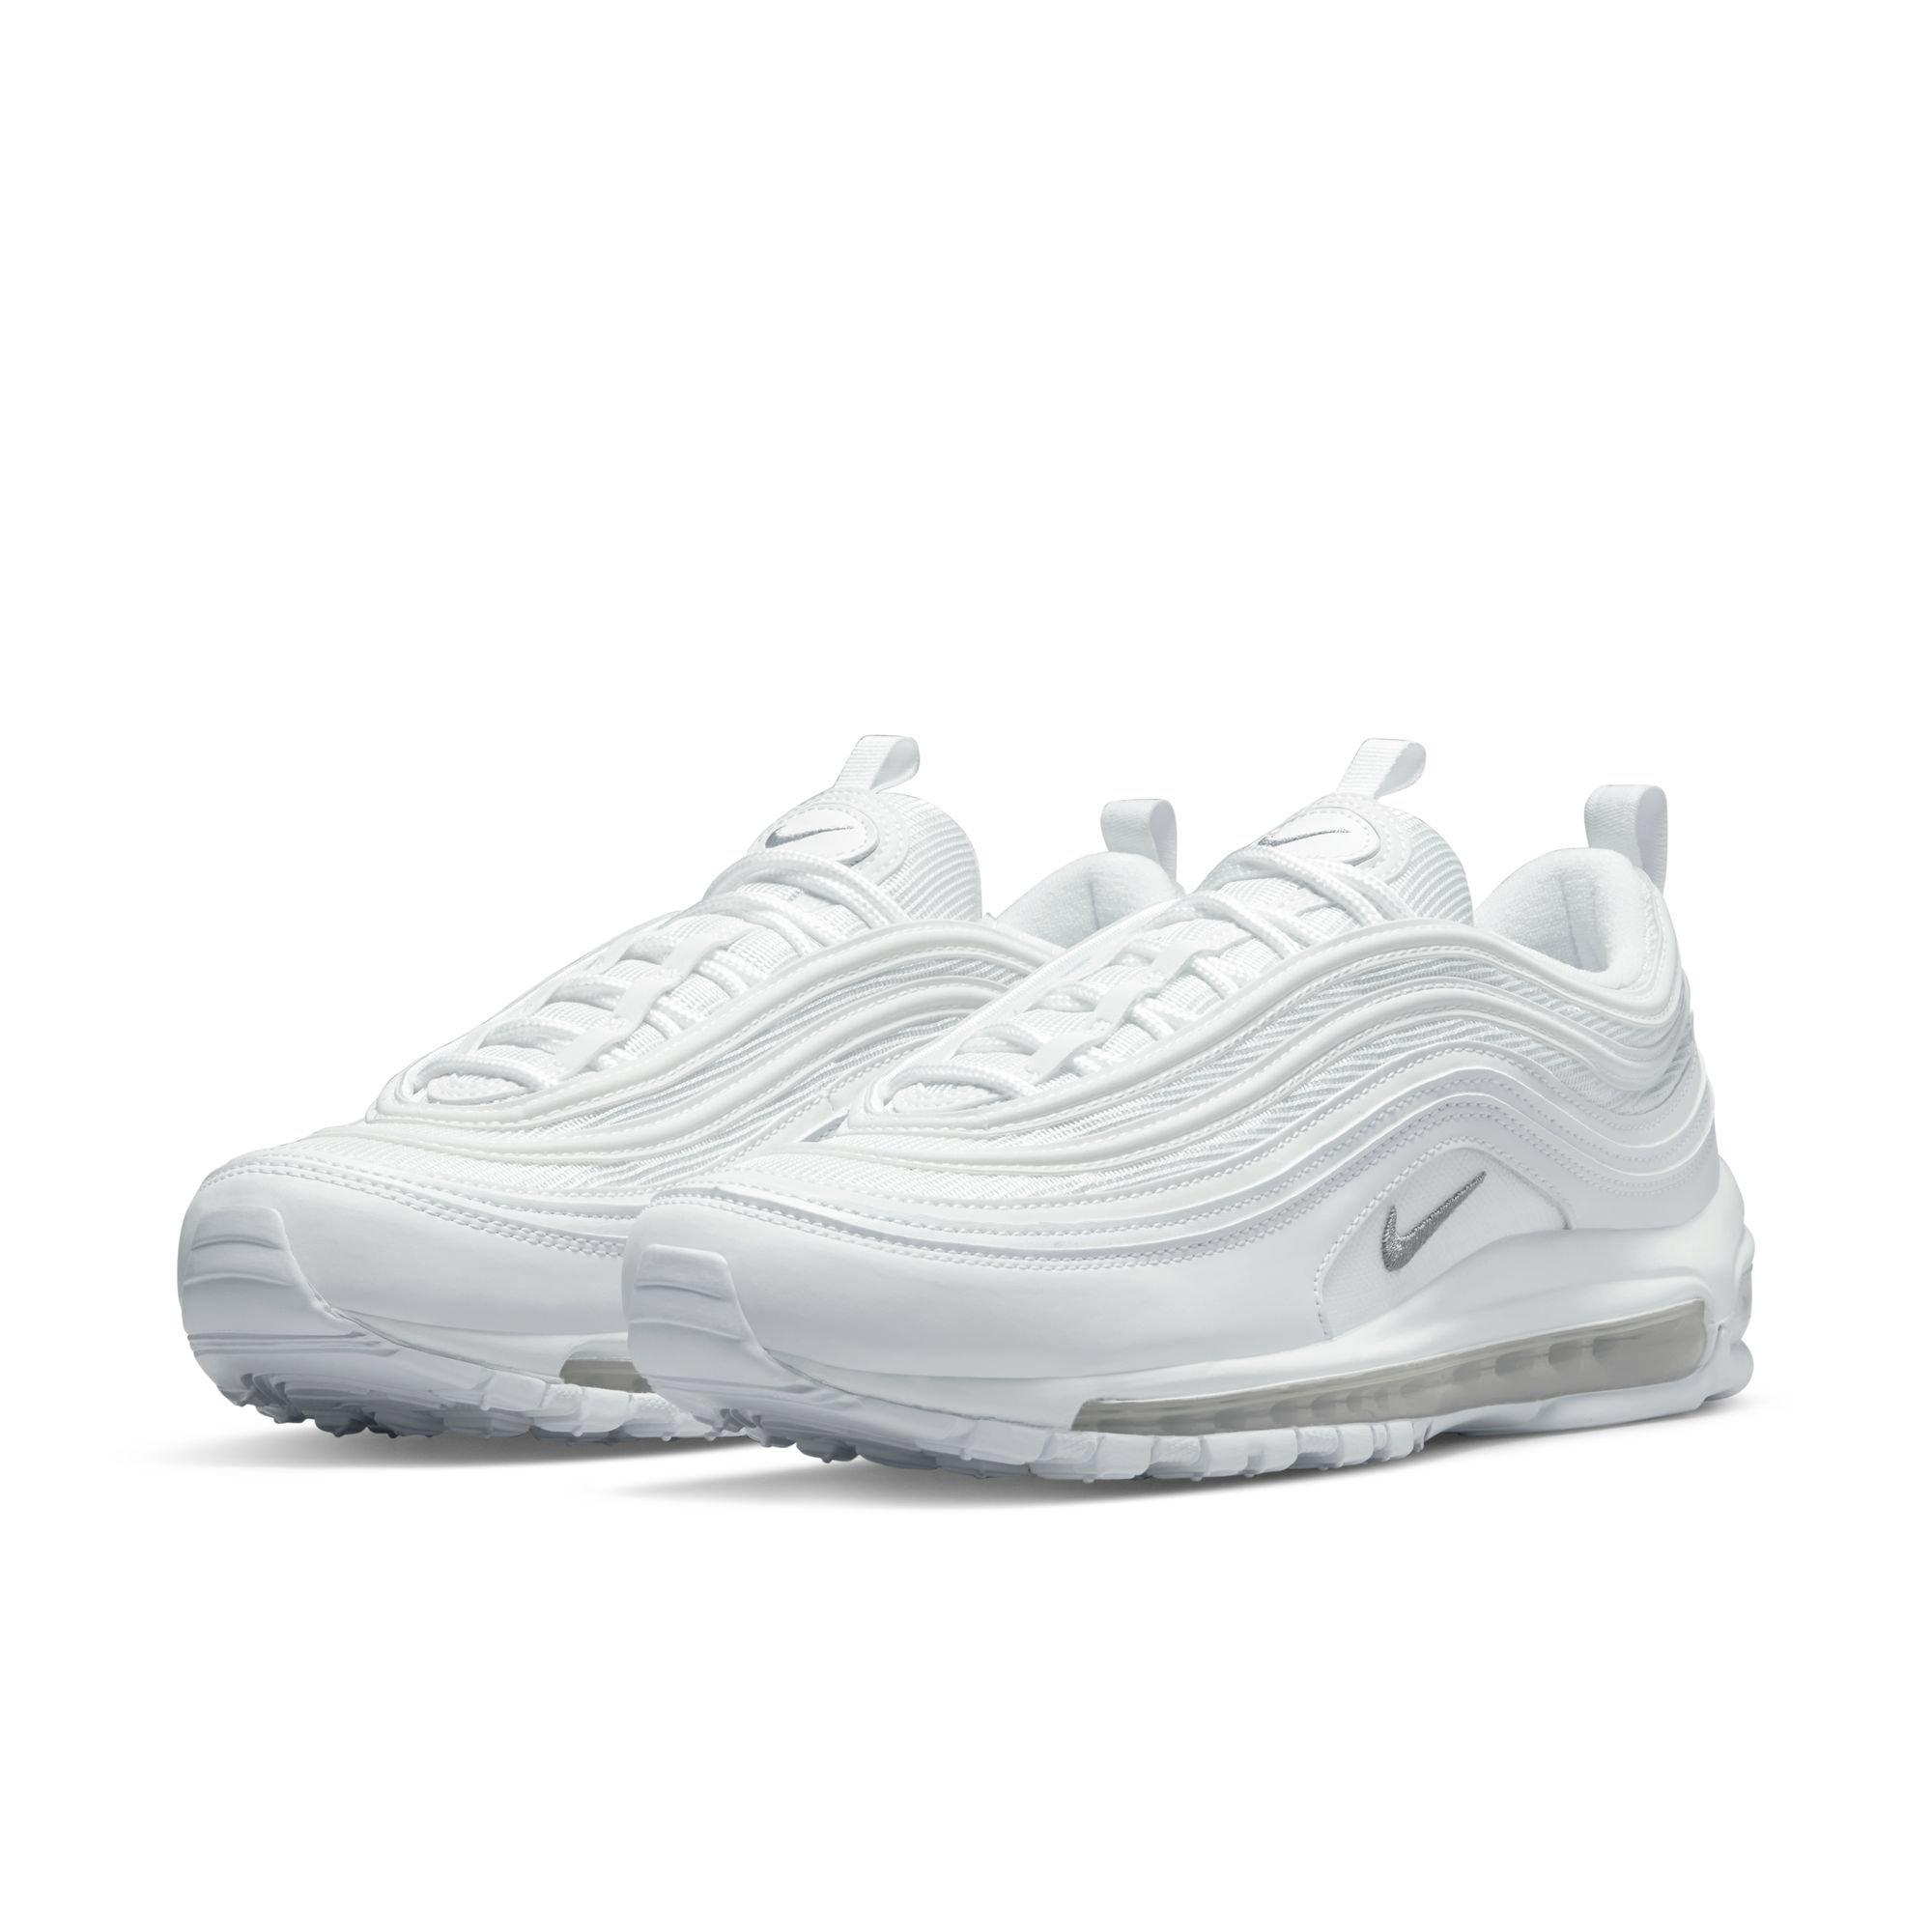 Nike Air Max 97 OG White Wolf Grey Reflective Men Casual Shoes